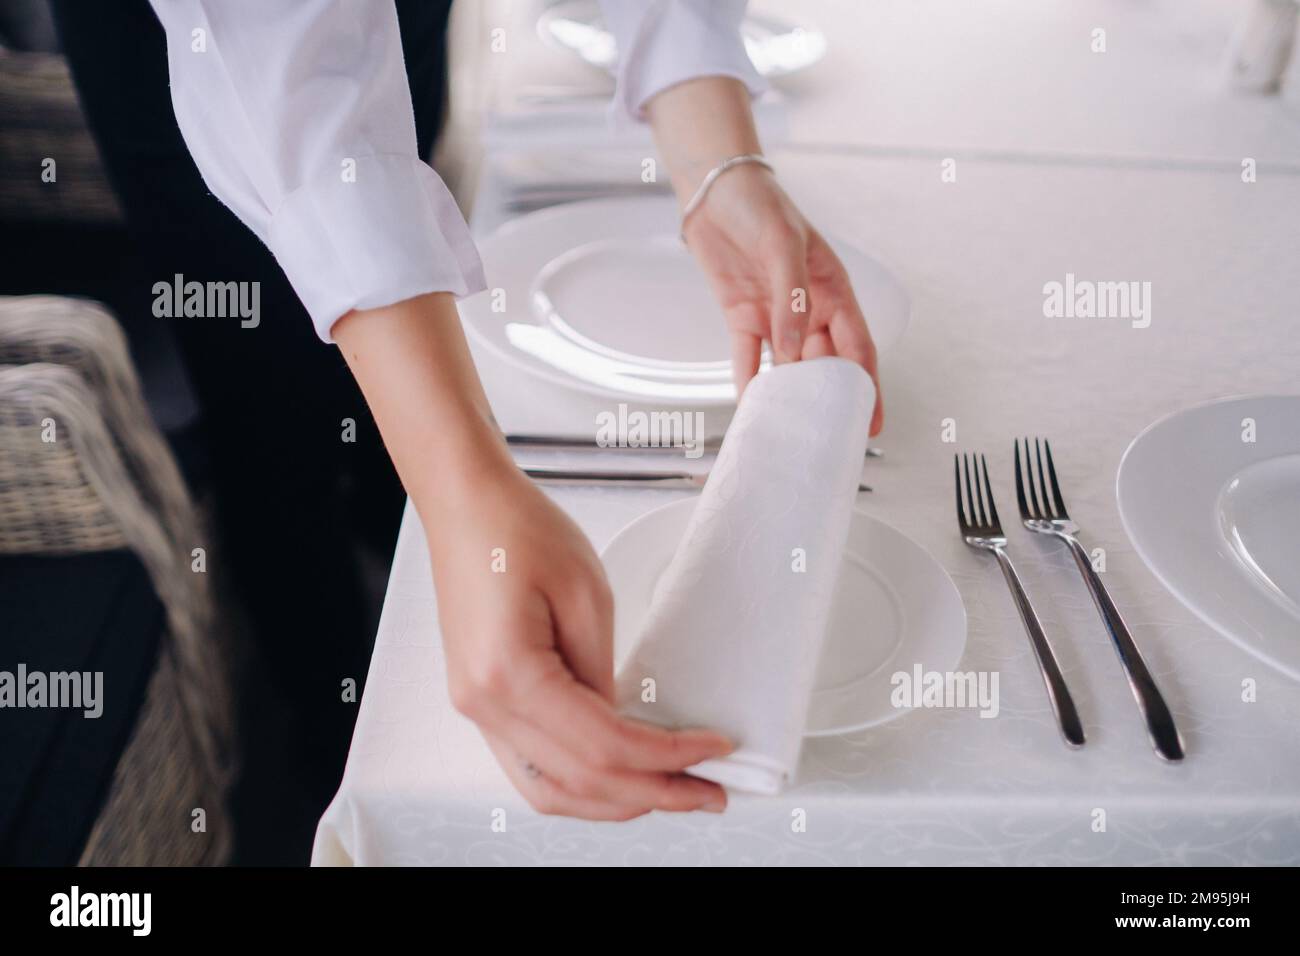 The waiter puts a white napkin on the plate. Beautiful table setting for a holiday without food. Stock Photo